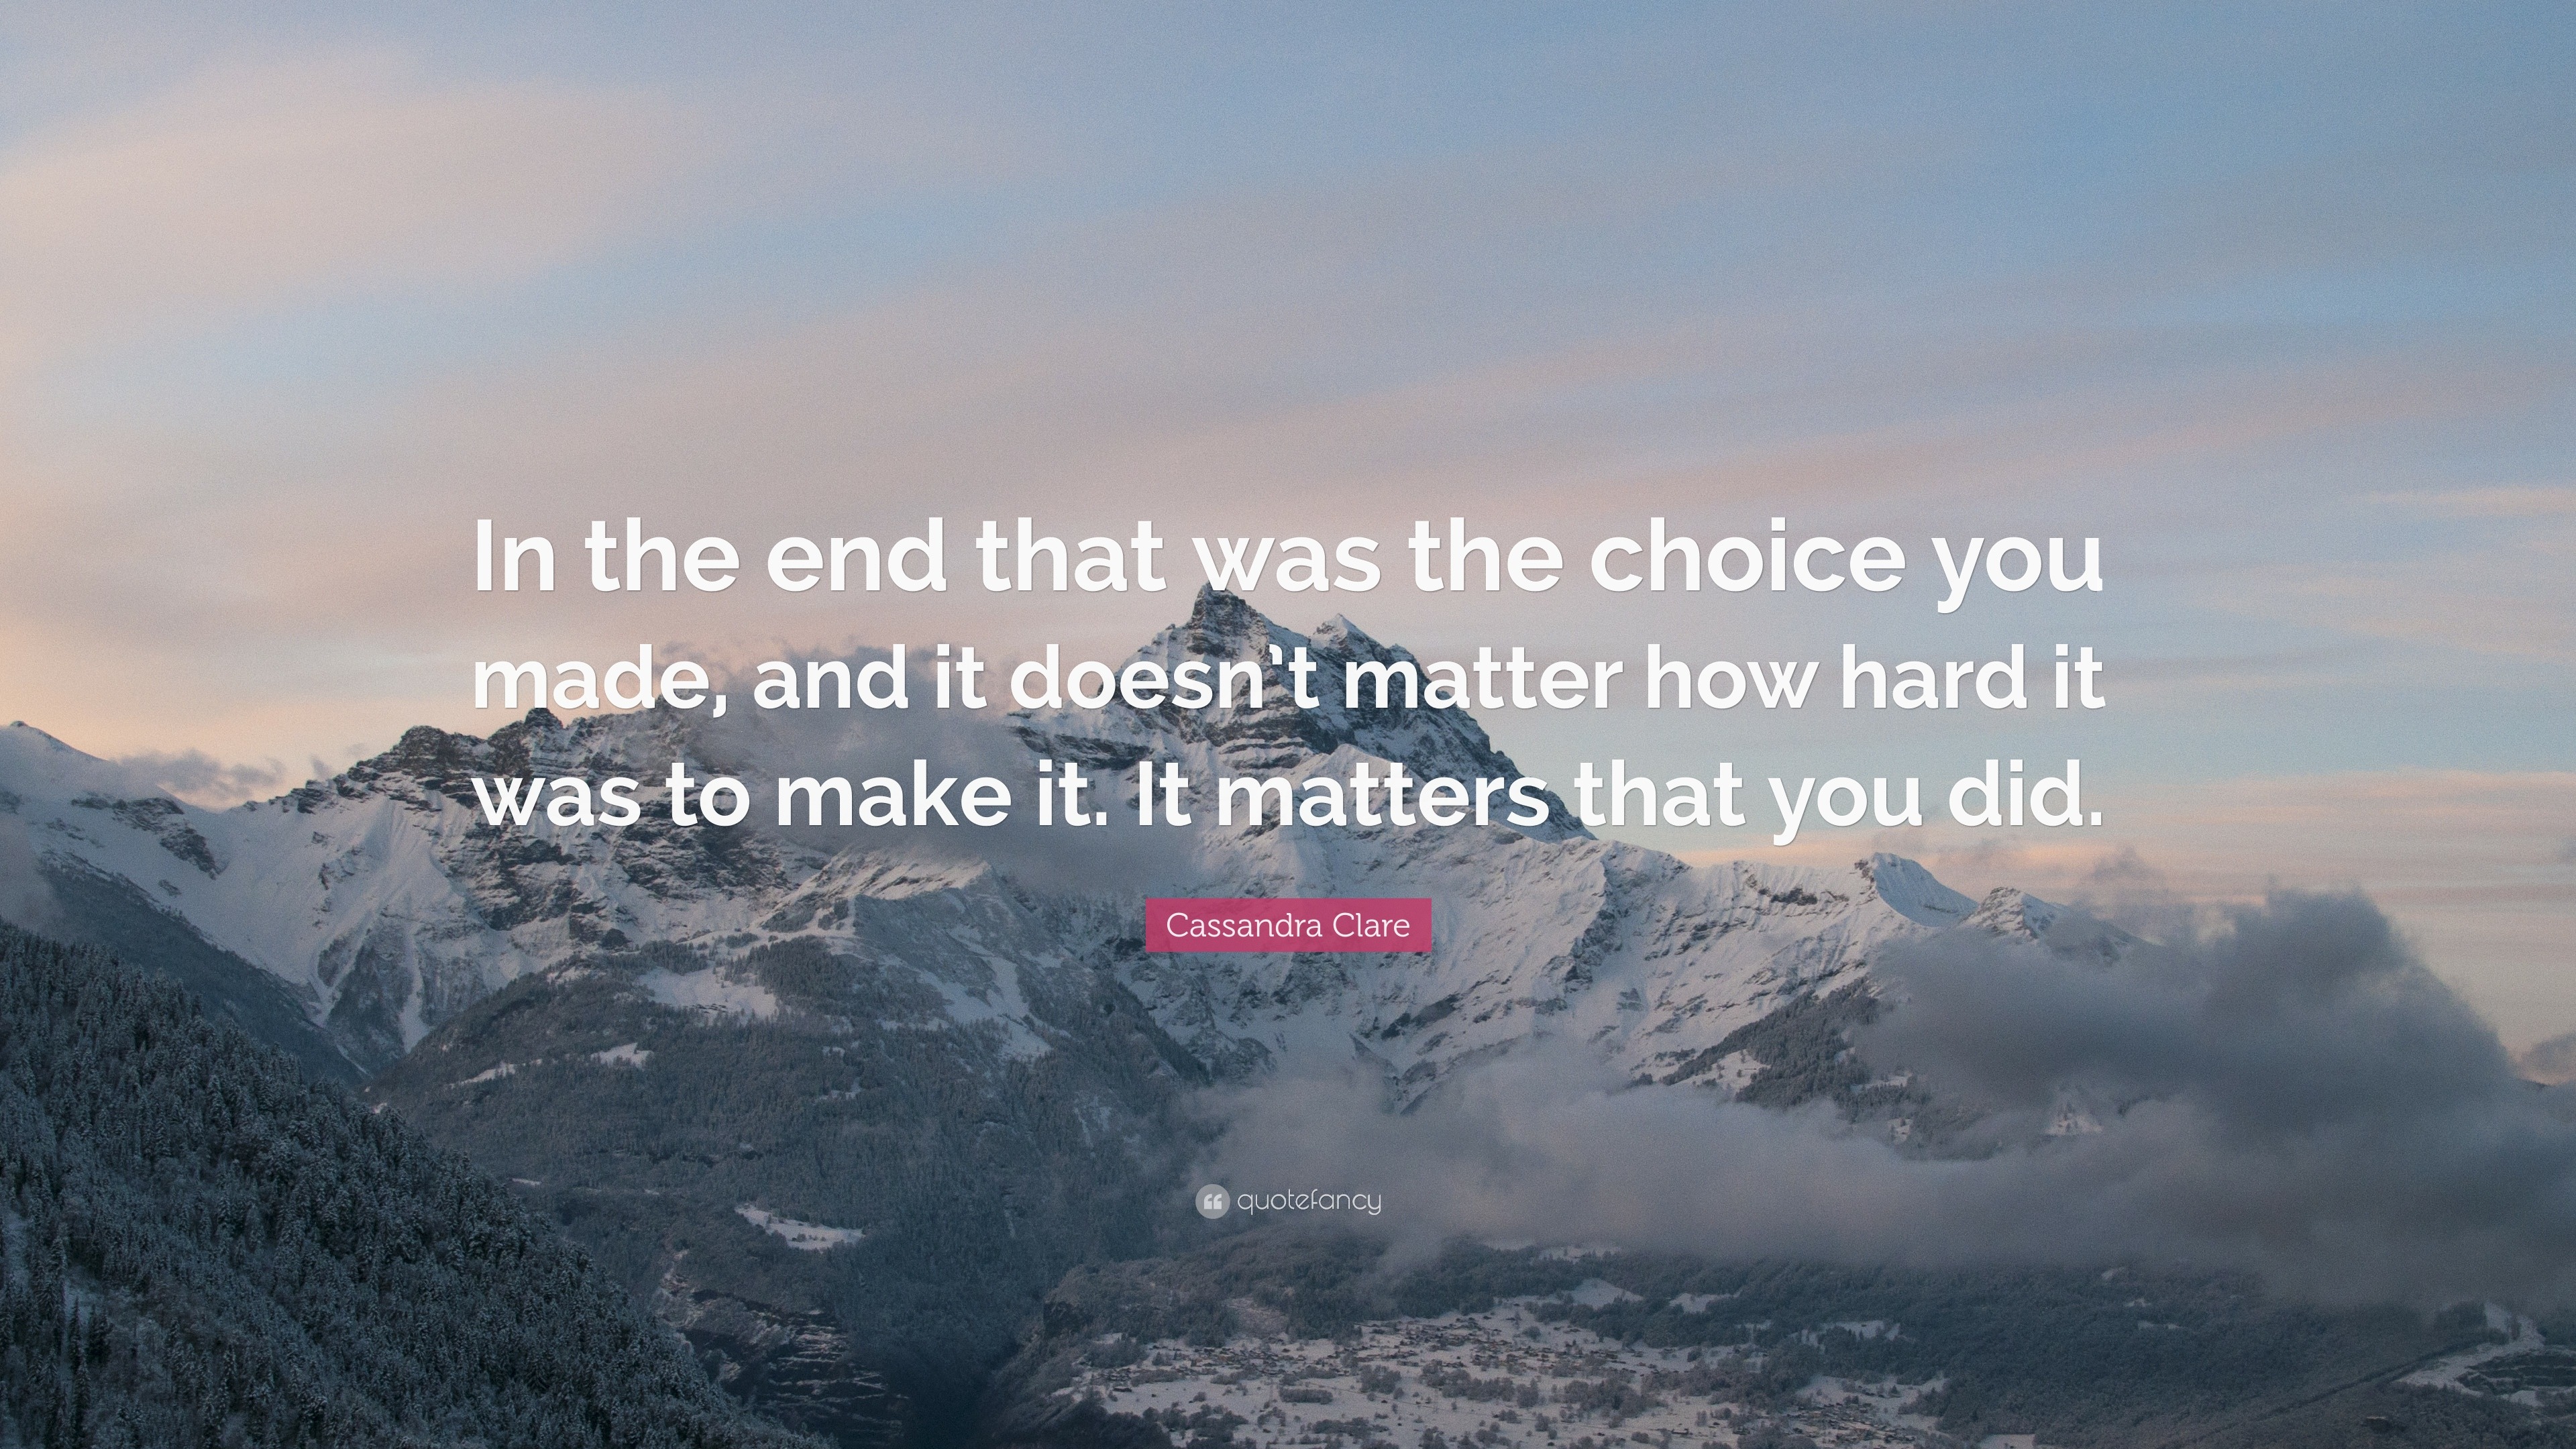 Cassandra Clare Quote: “In the end that was the choice you made, and it ...